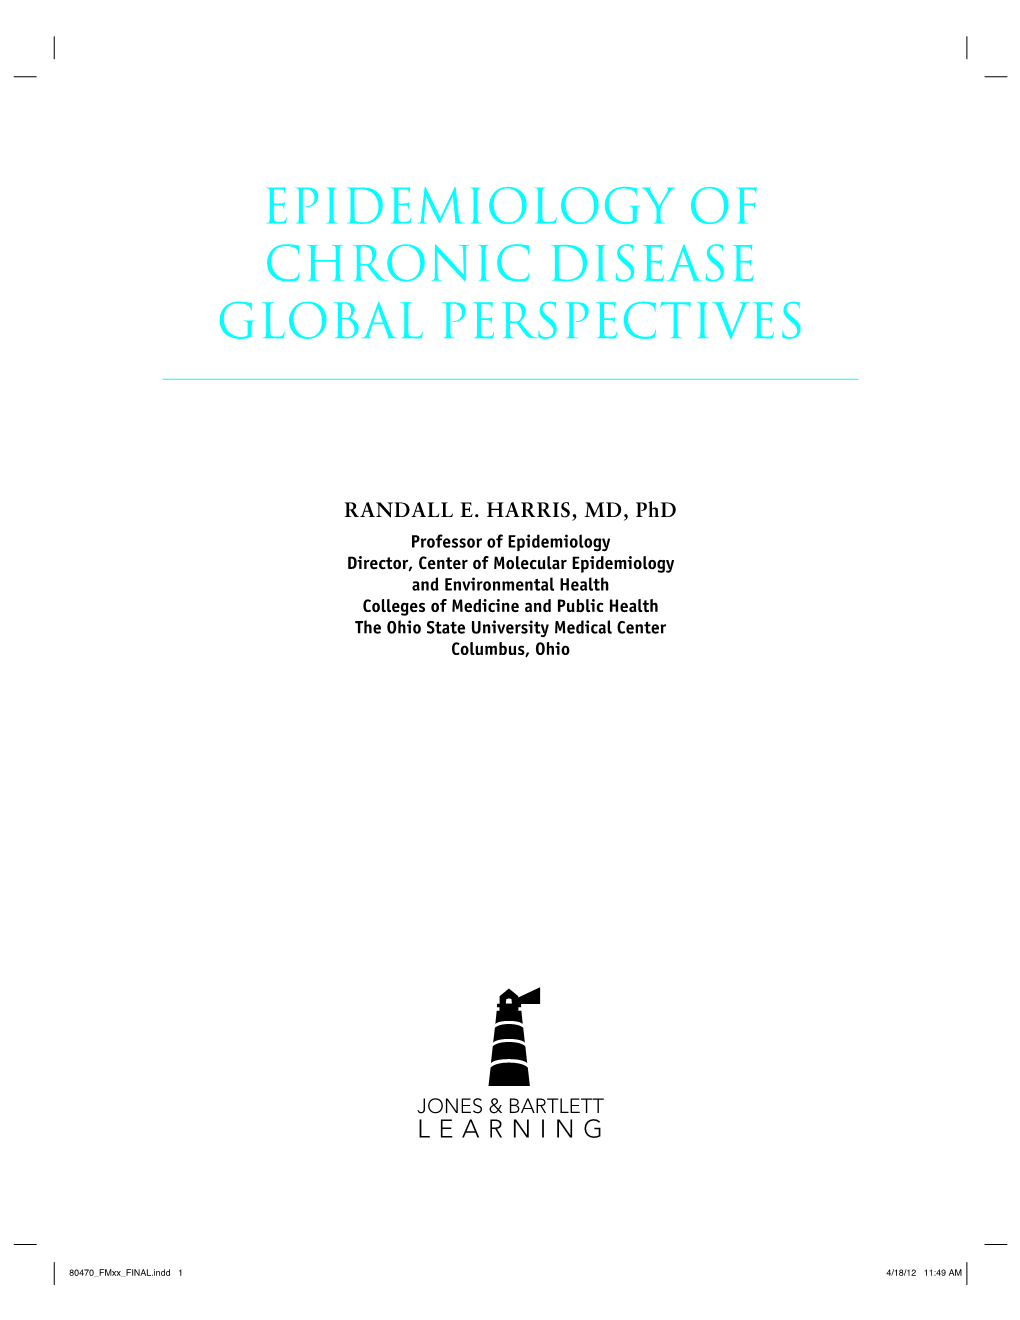 Epidemiology of Chronic Disease Global Perspectives